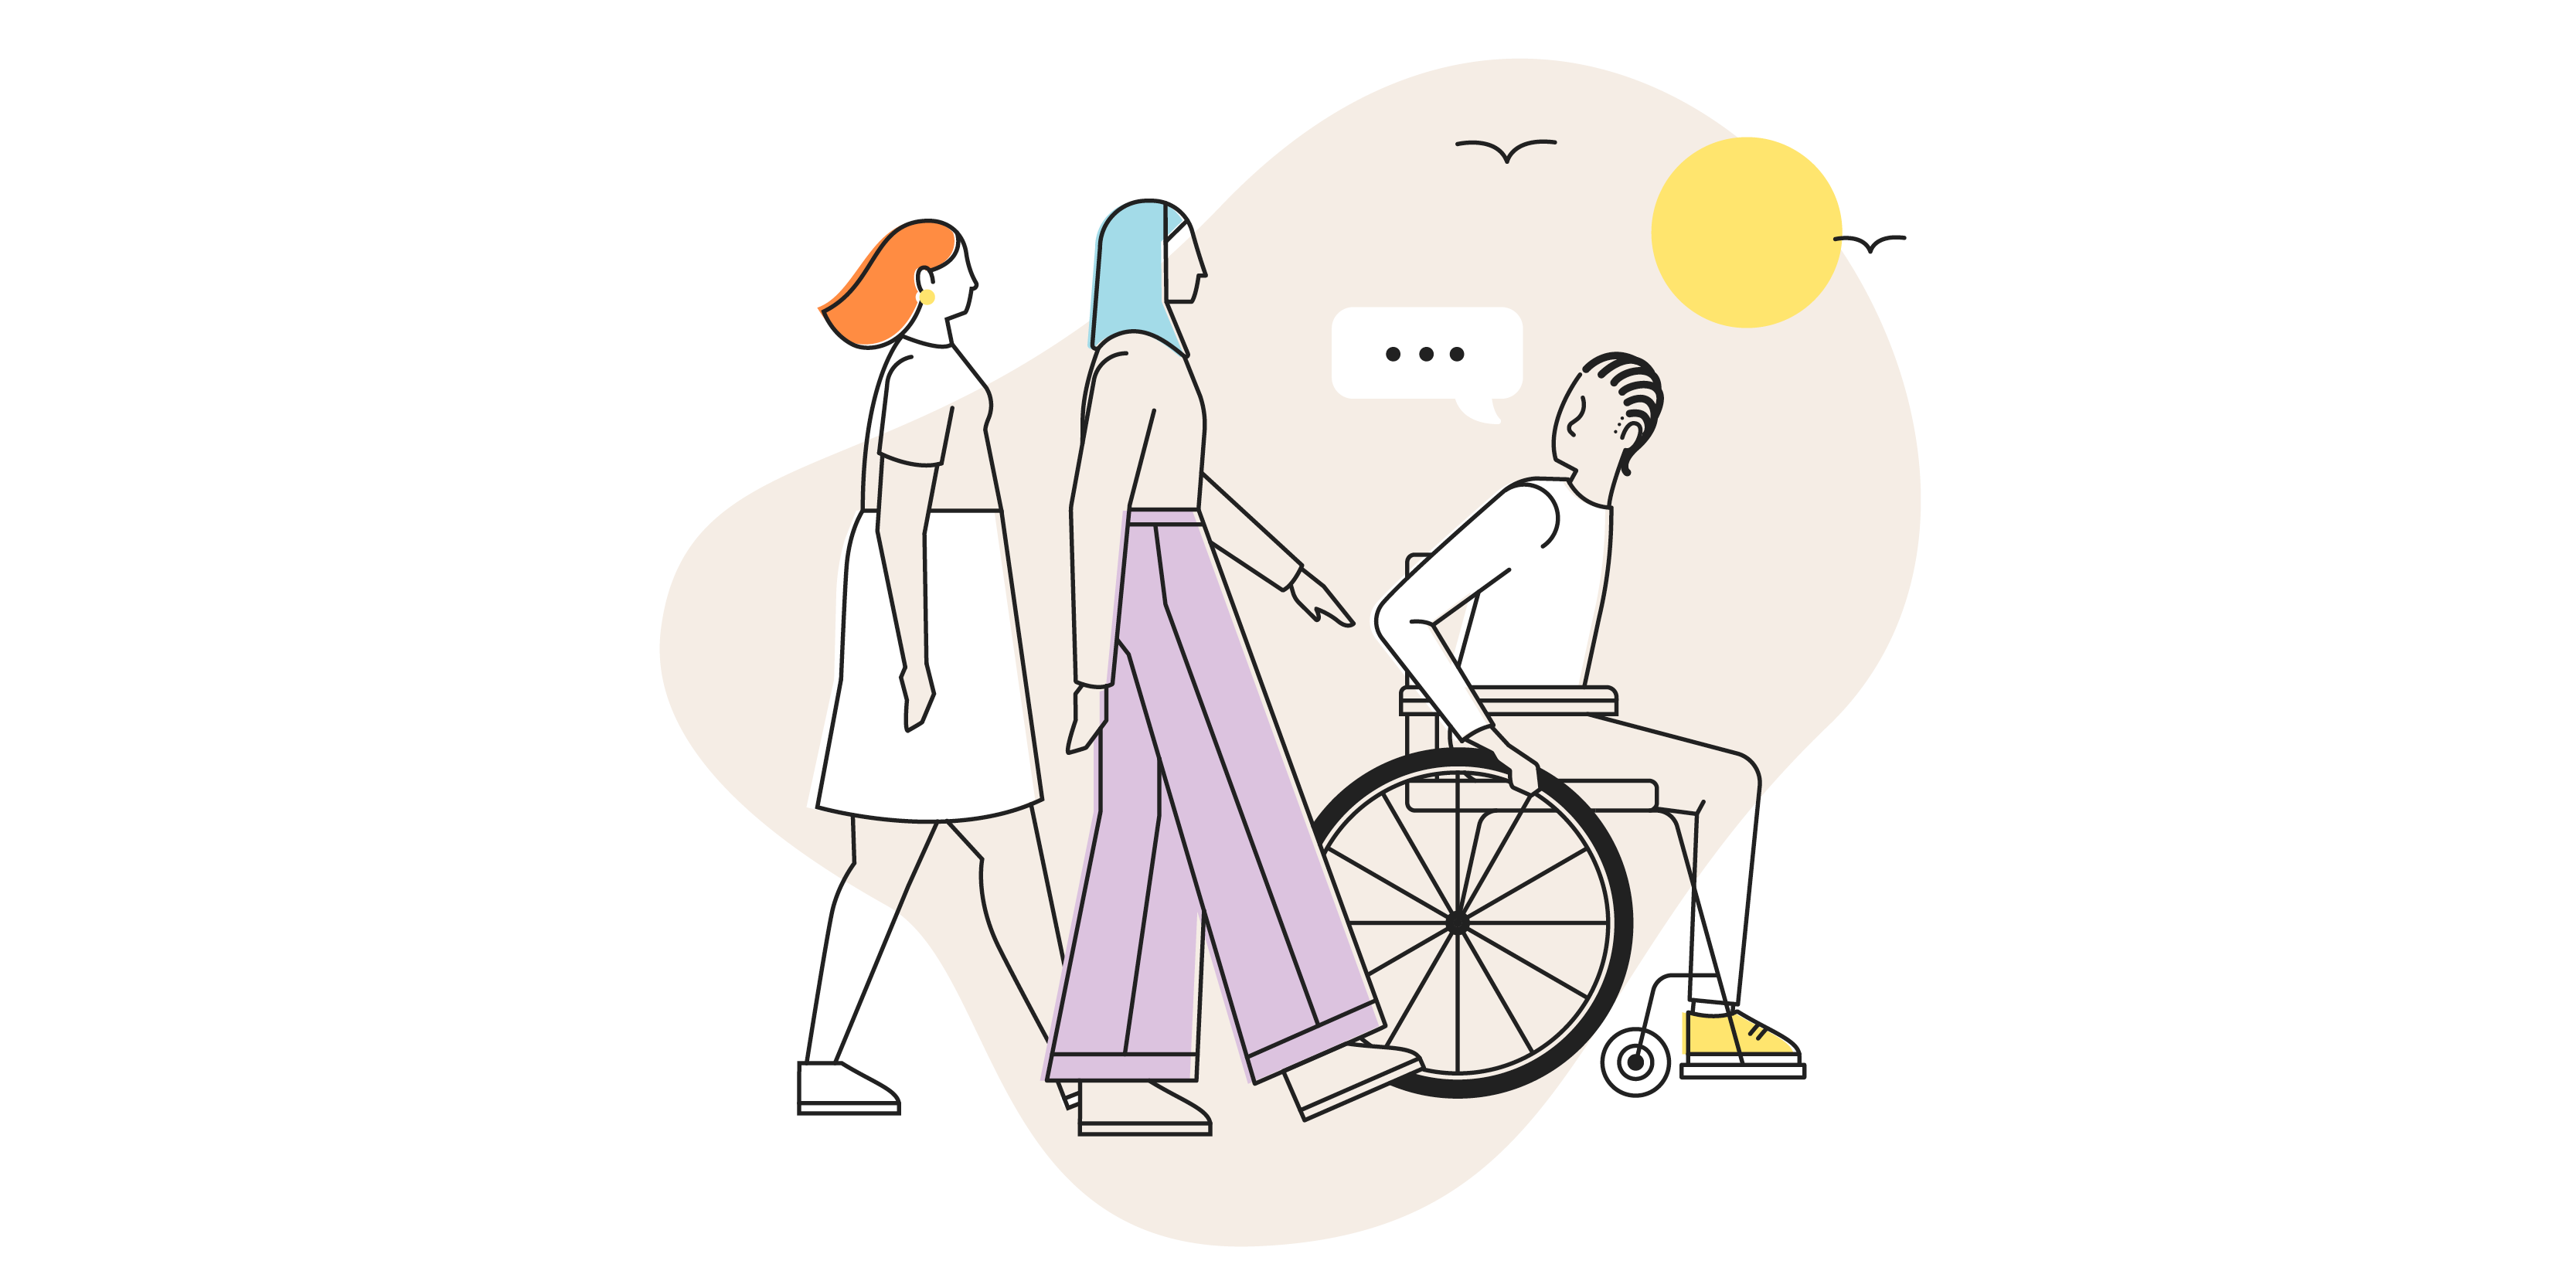 Illustration of 3 people outdoors chatting. 2 people are walking and one is in a wheelchair